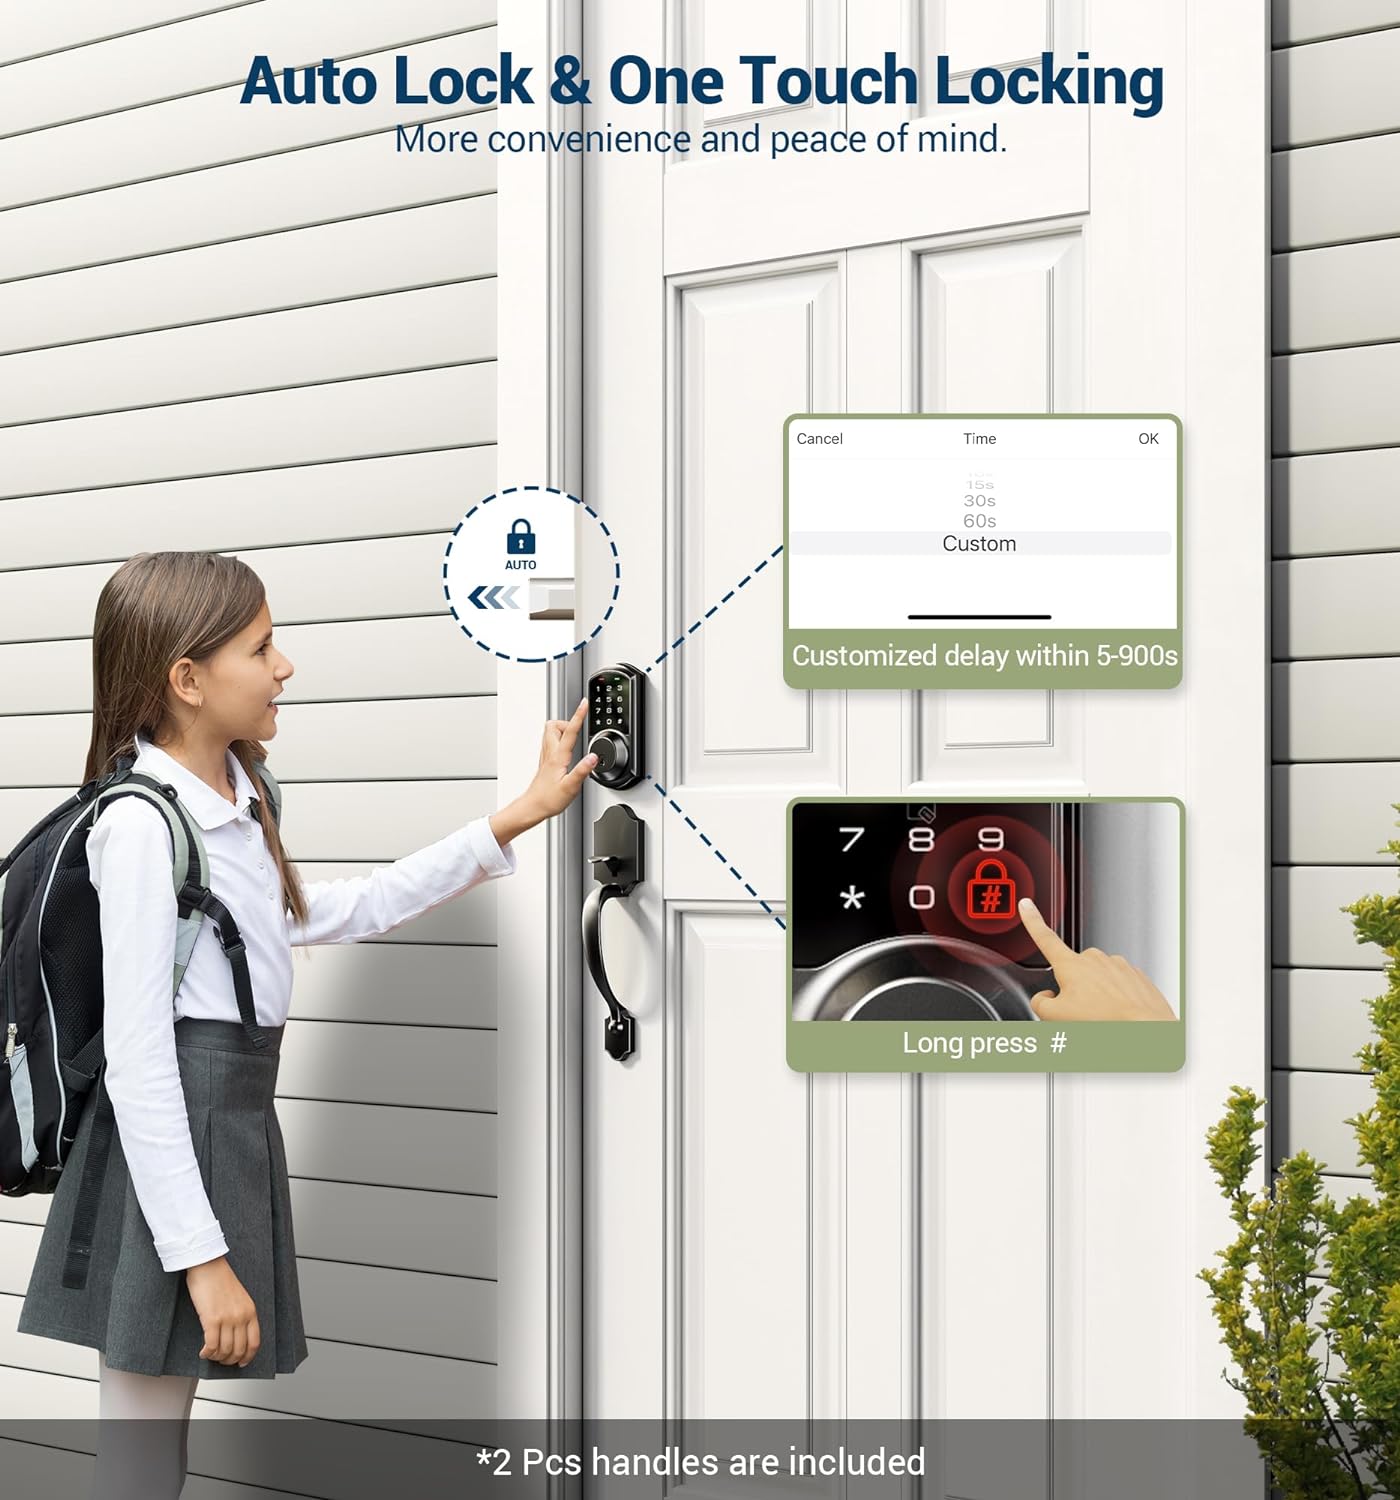 Veise VE06-H Smart Front Door Lock Set, App Control, Keyless Entry Deadbolt with Lever Handle, Electronic Digital Touchscreen Keypad, Auto Lock, Easy Install